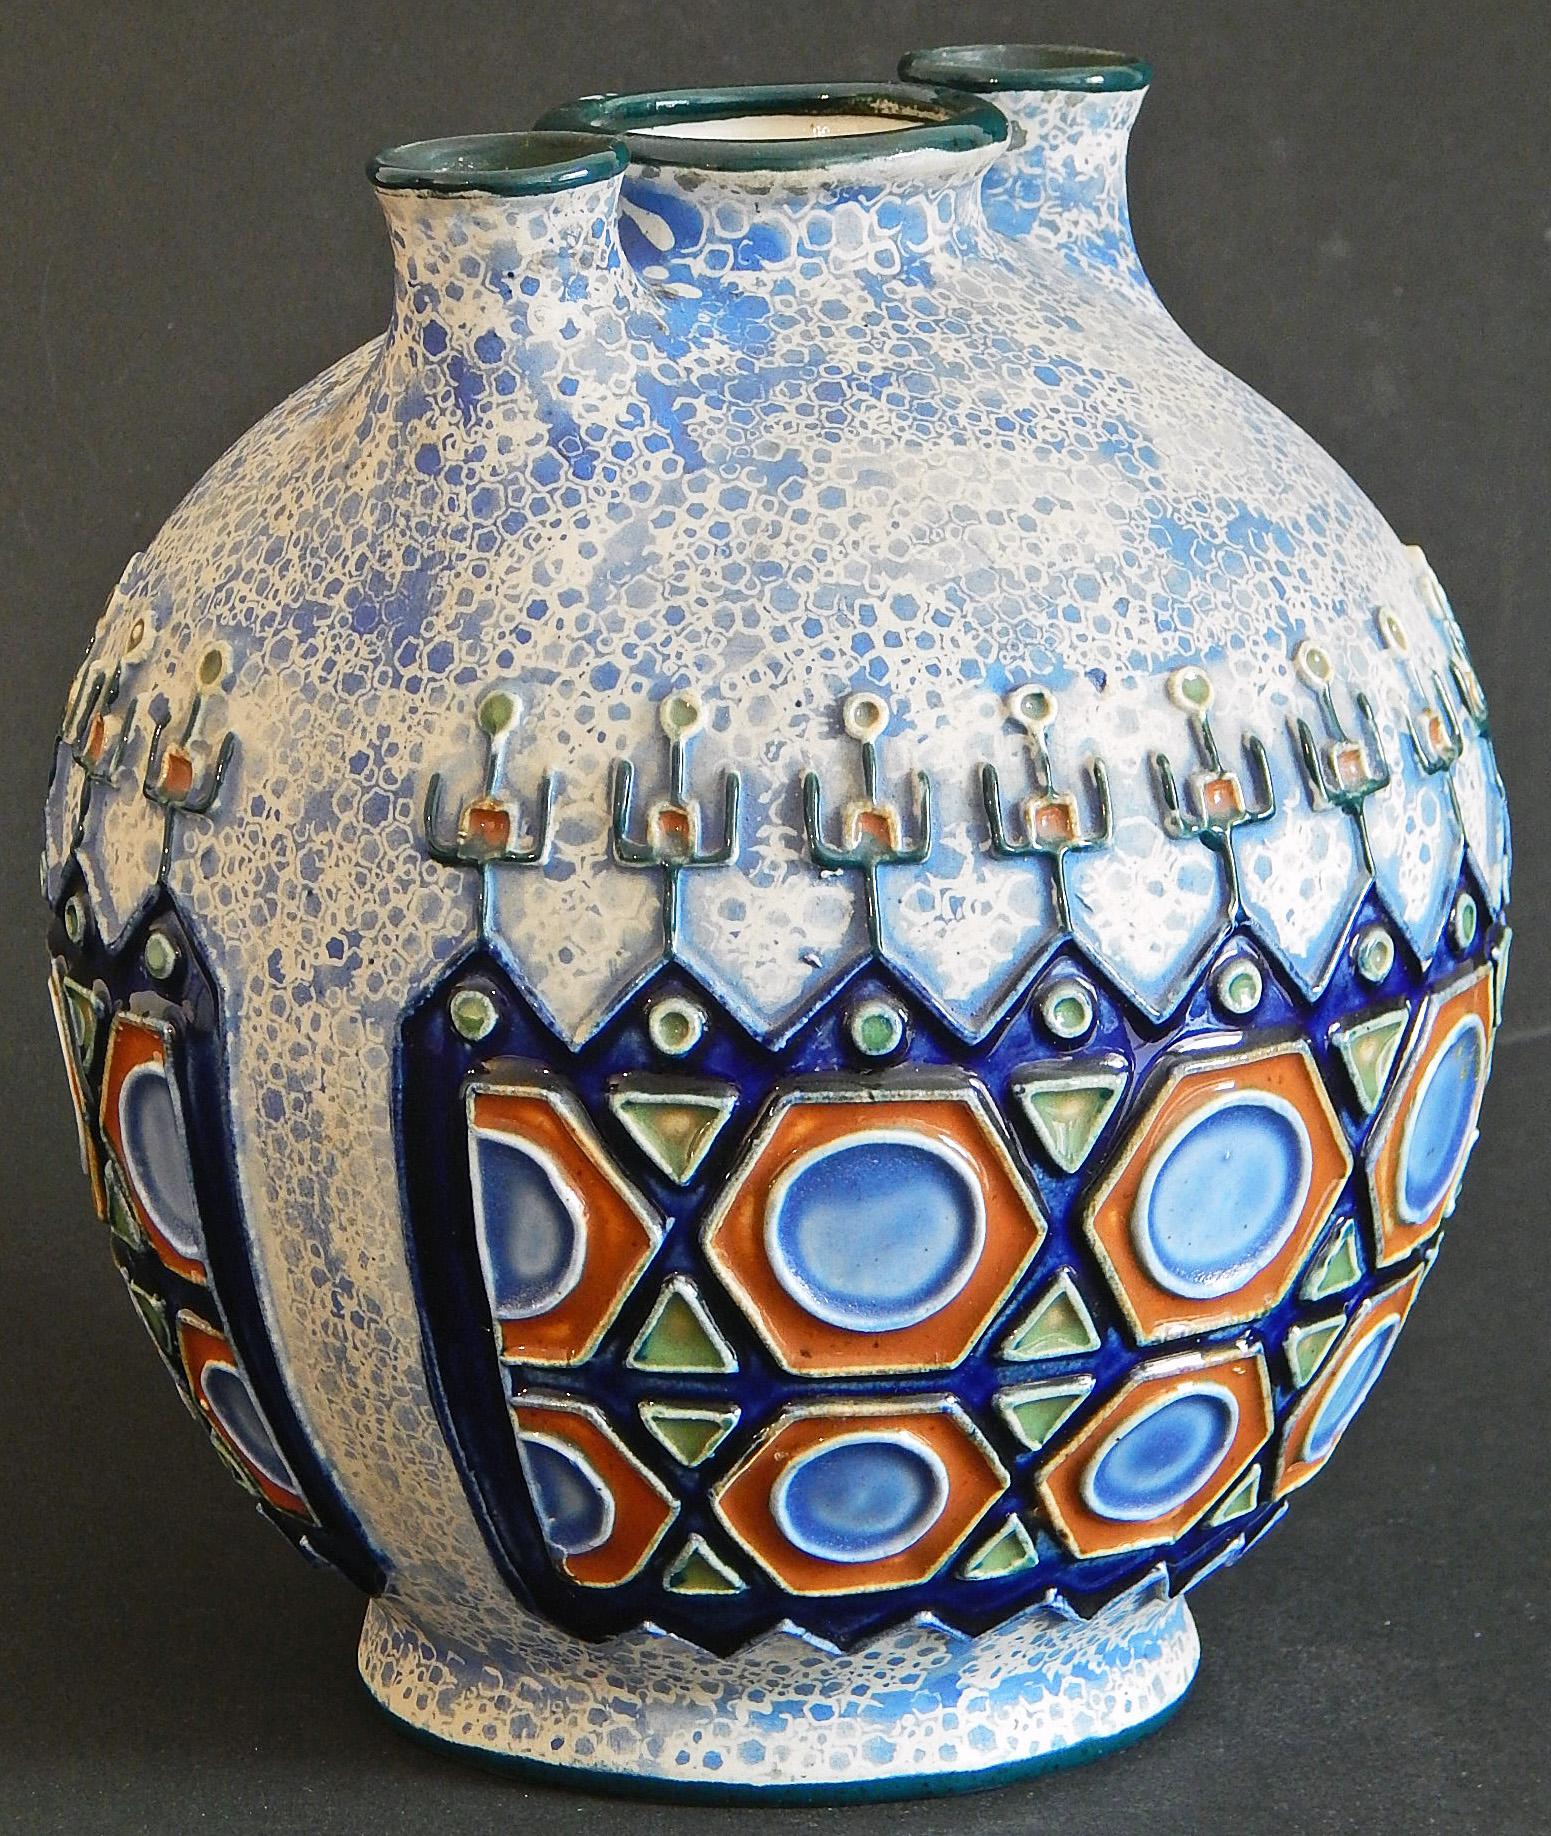 Rare and gorgeously glazed, this remarkable vase finished in rich, deep blues, golds and white, was produced the famed Amphora pottery works in the Czech Republic, during the nation's short period of independence in the 1920s and 1930s, between the